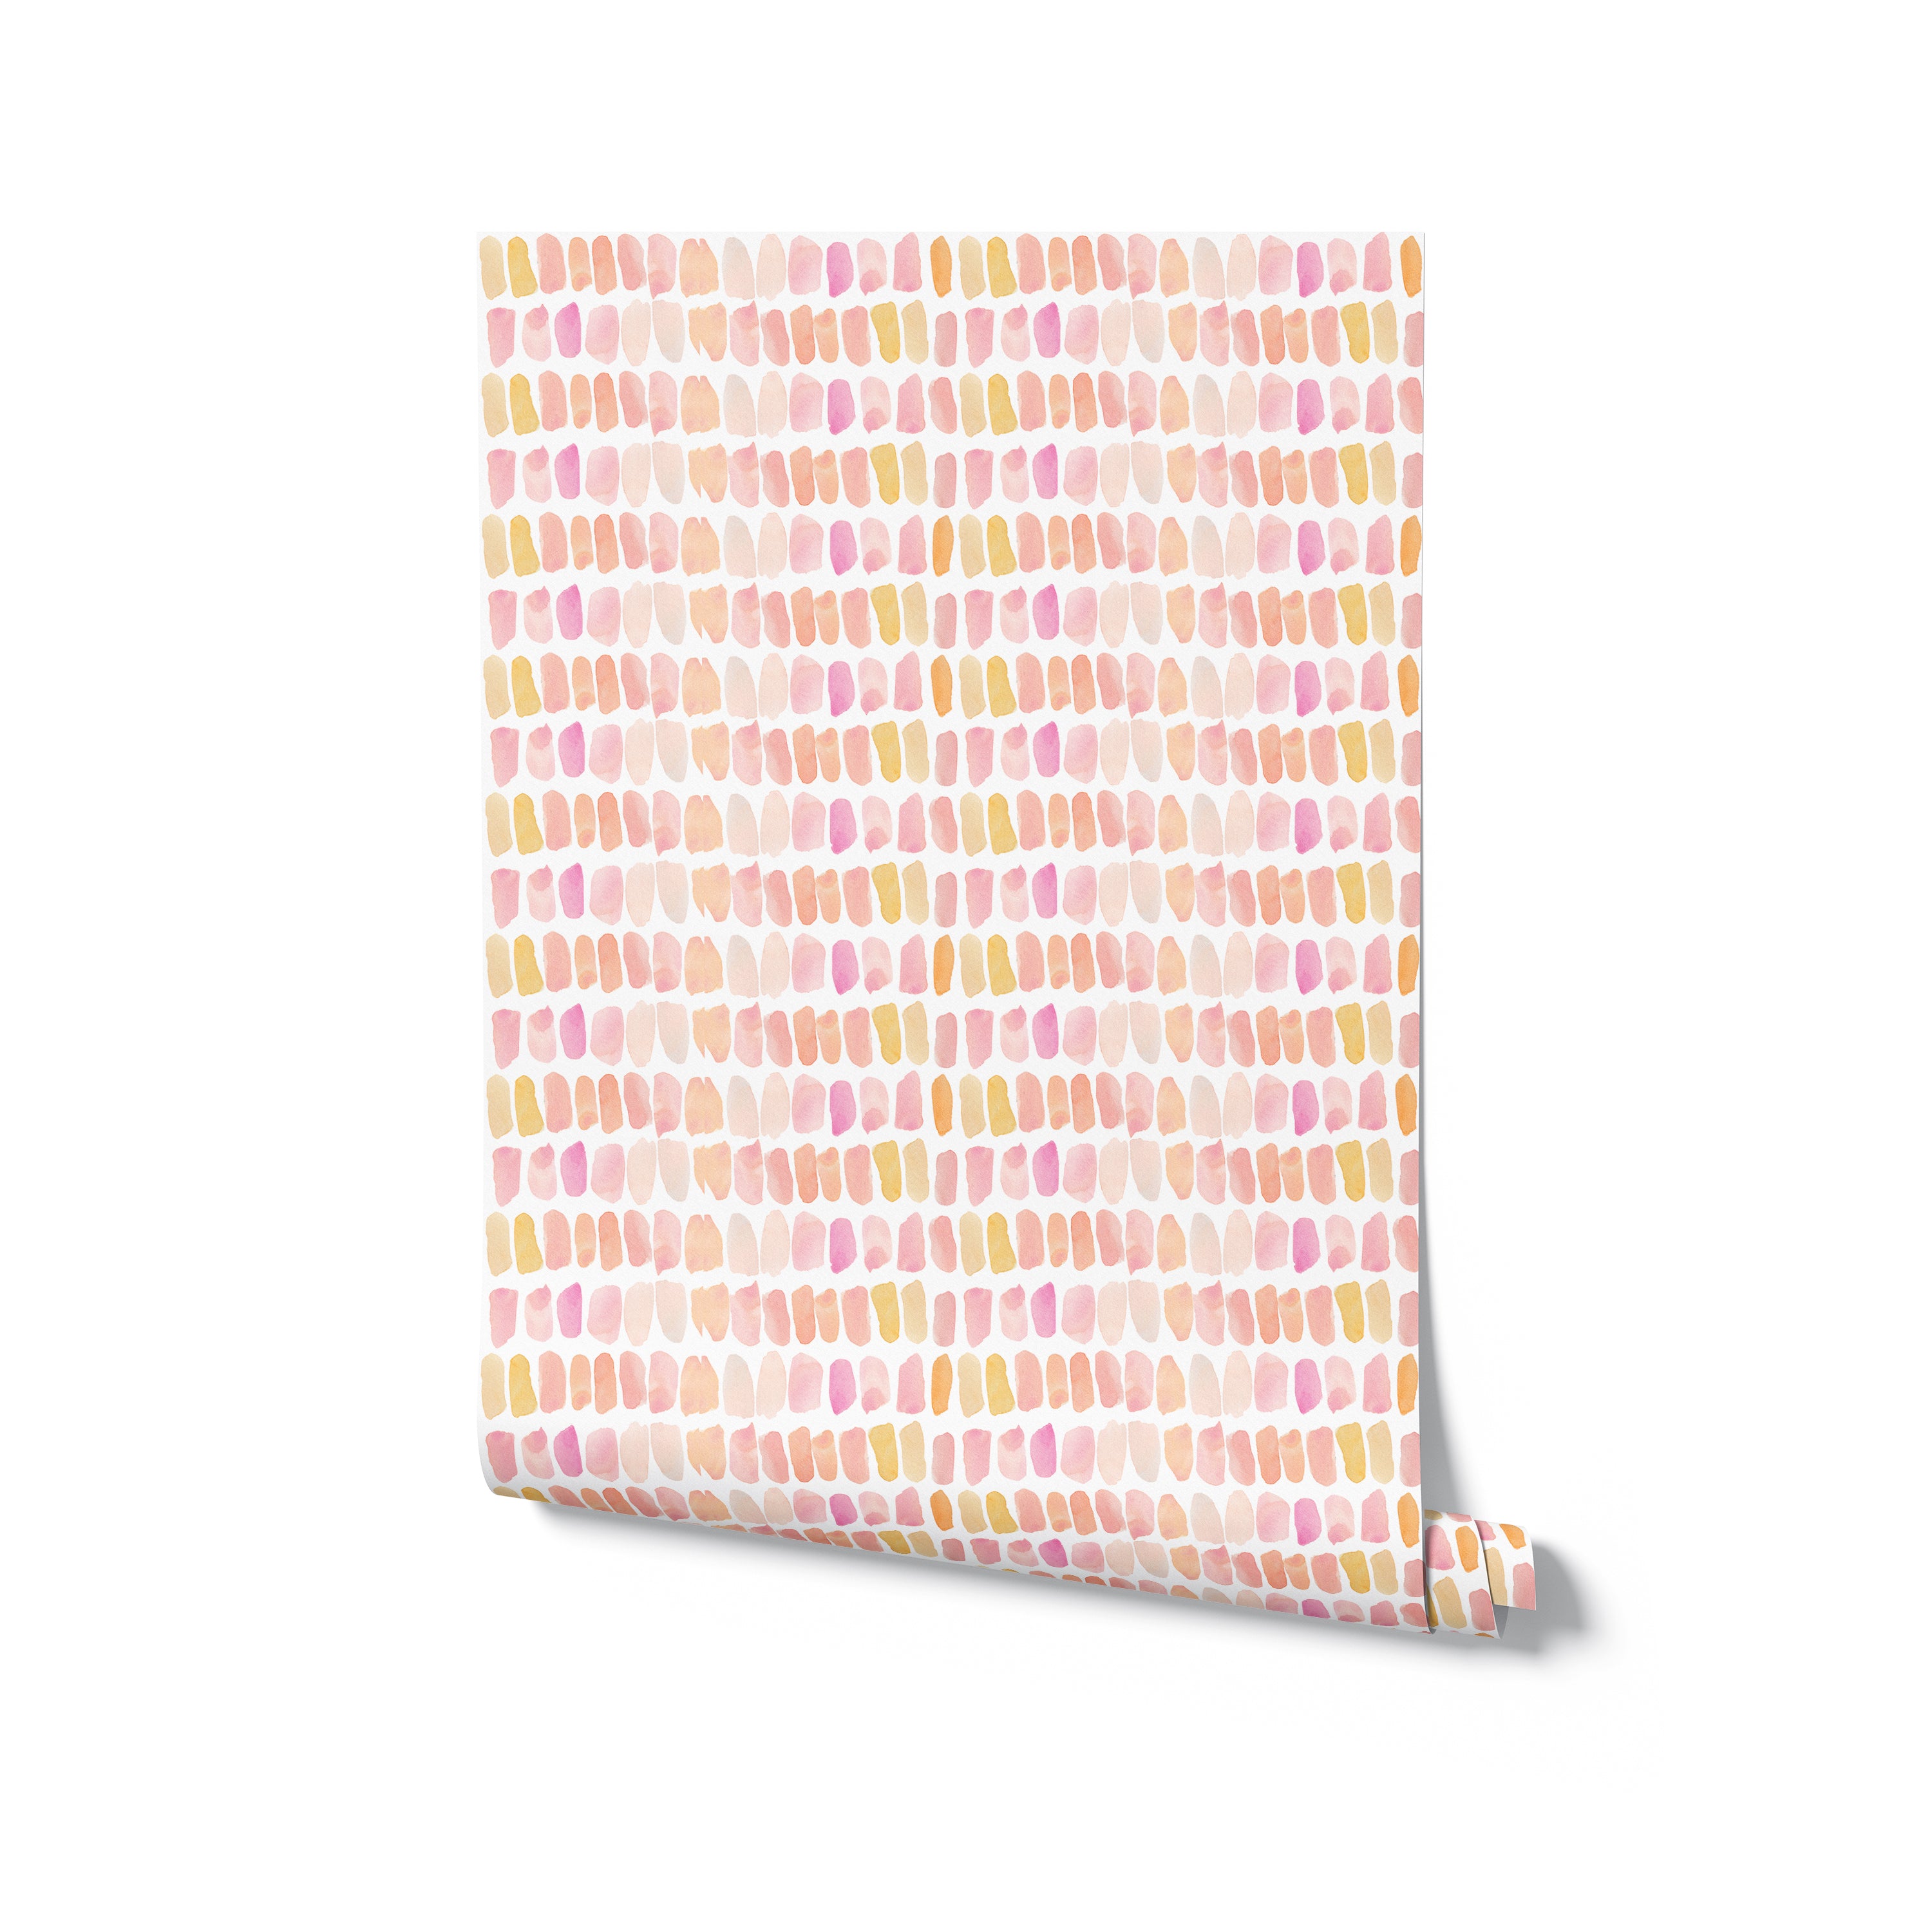 An angled view of the hand-painted wallpaper roll, partially unrolled to show the cheerful pattern of pink, peach, and yellow dashes. This image highlights the wallpaper’s texture and the vibrant, playful pattern designed for children’s spaces.